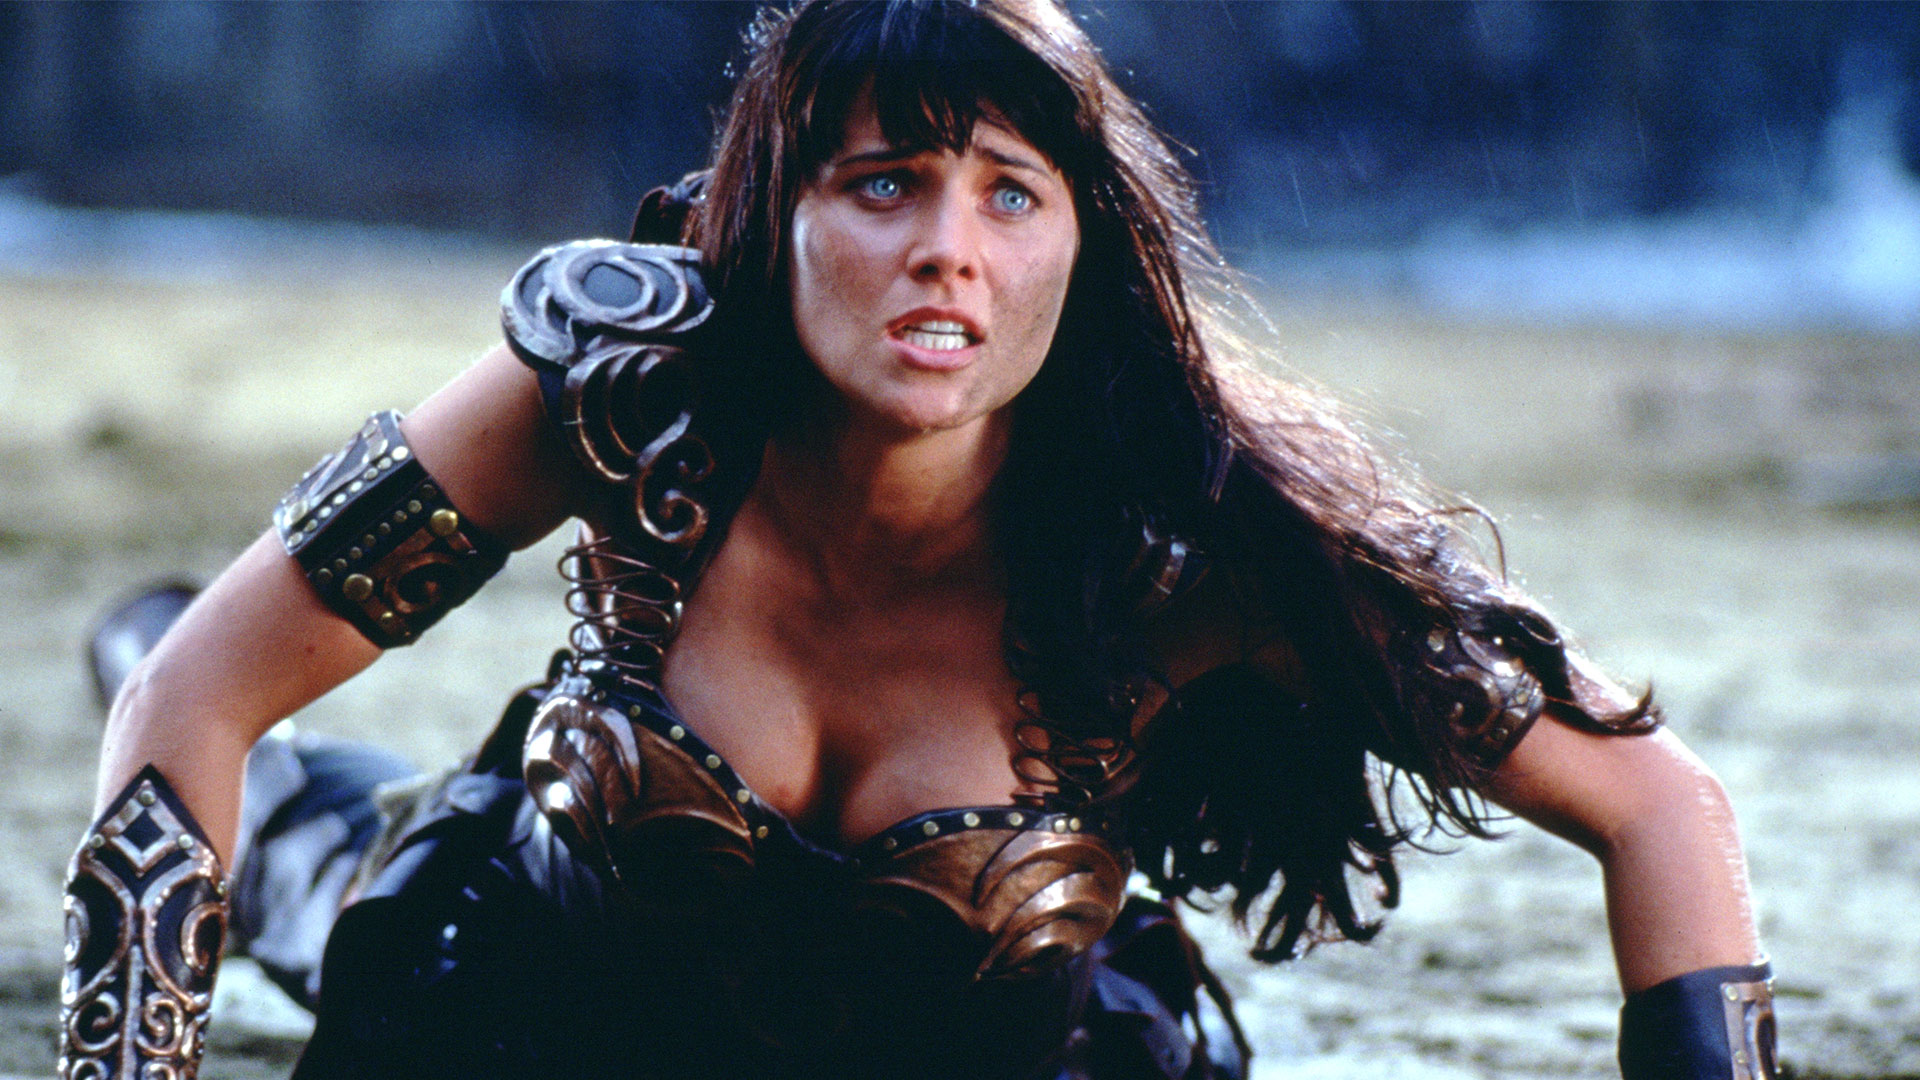 Watch The Ides of March (Season 4, Episode 21) of Xena: Warrior Princess or...